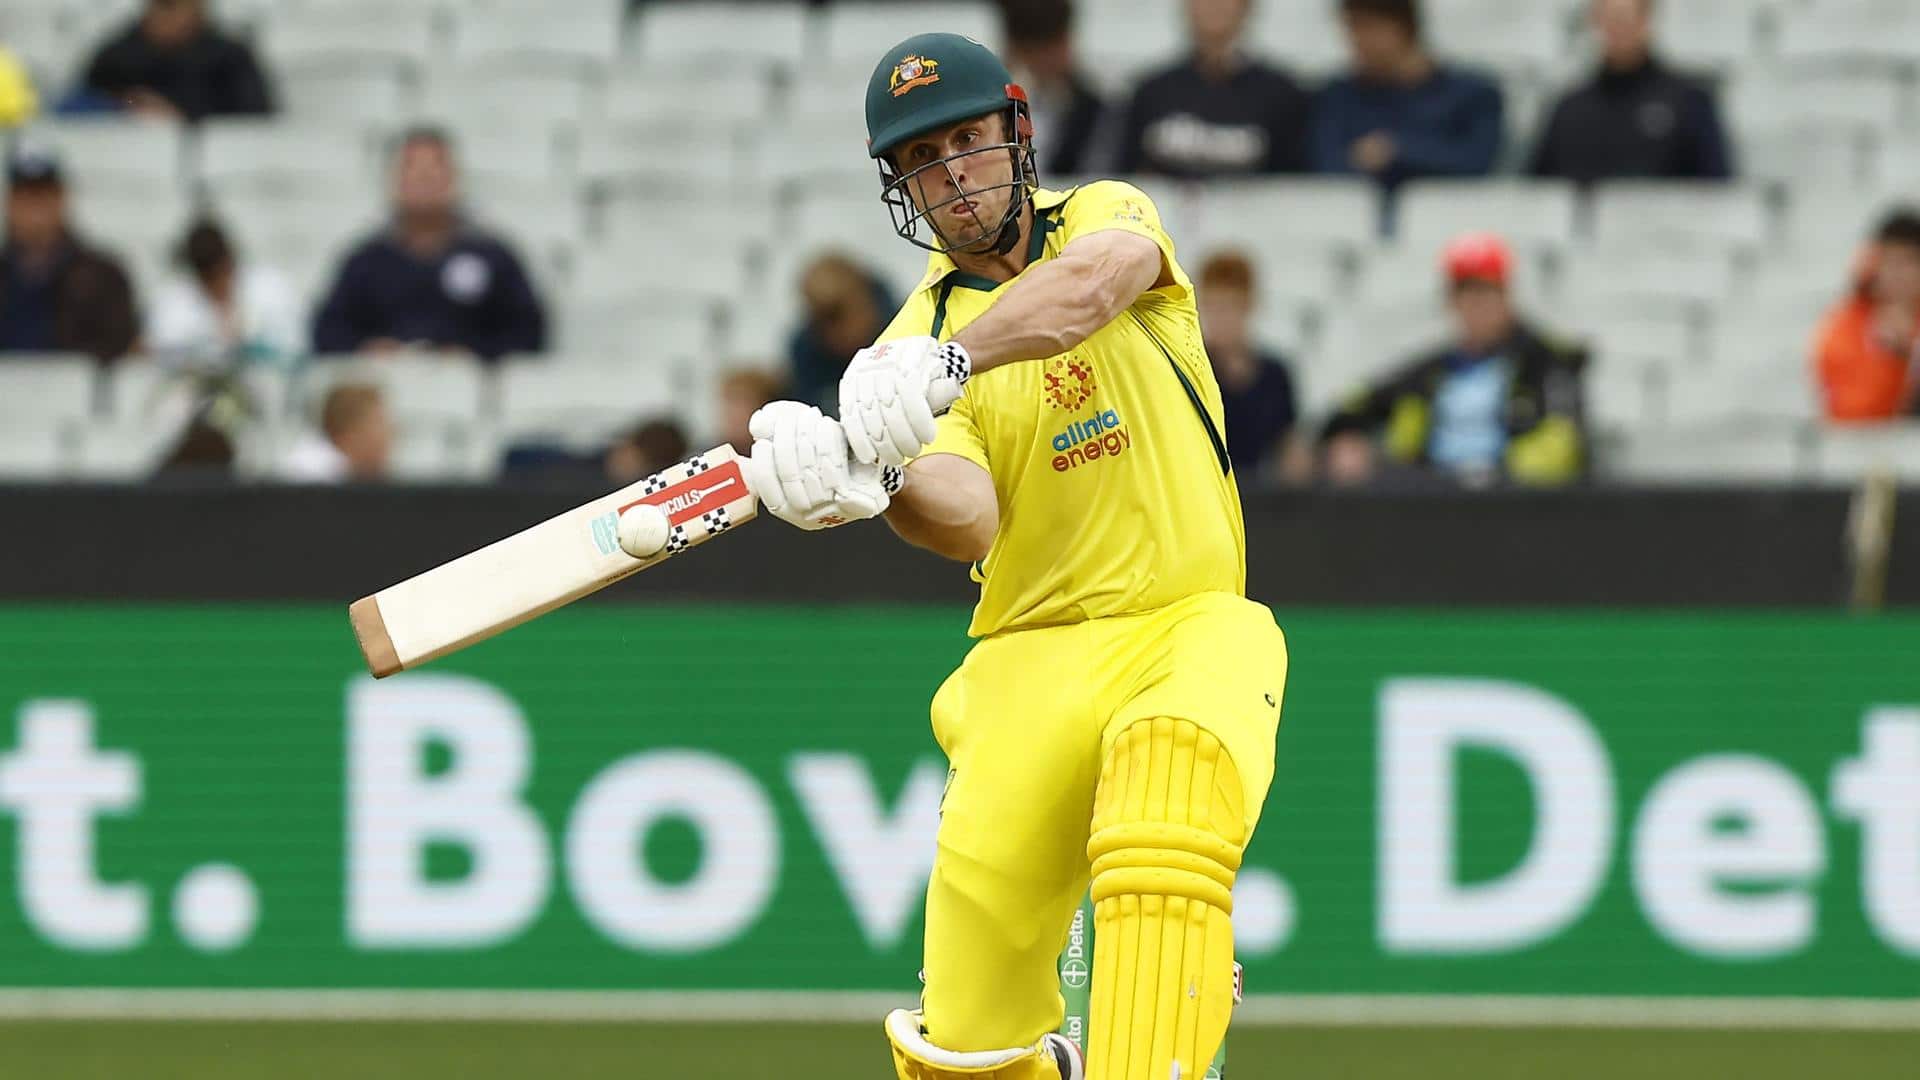 SA vs AUS: Mitchell Marsh hammers career-best 92* in T20Is